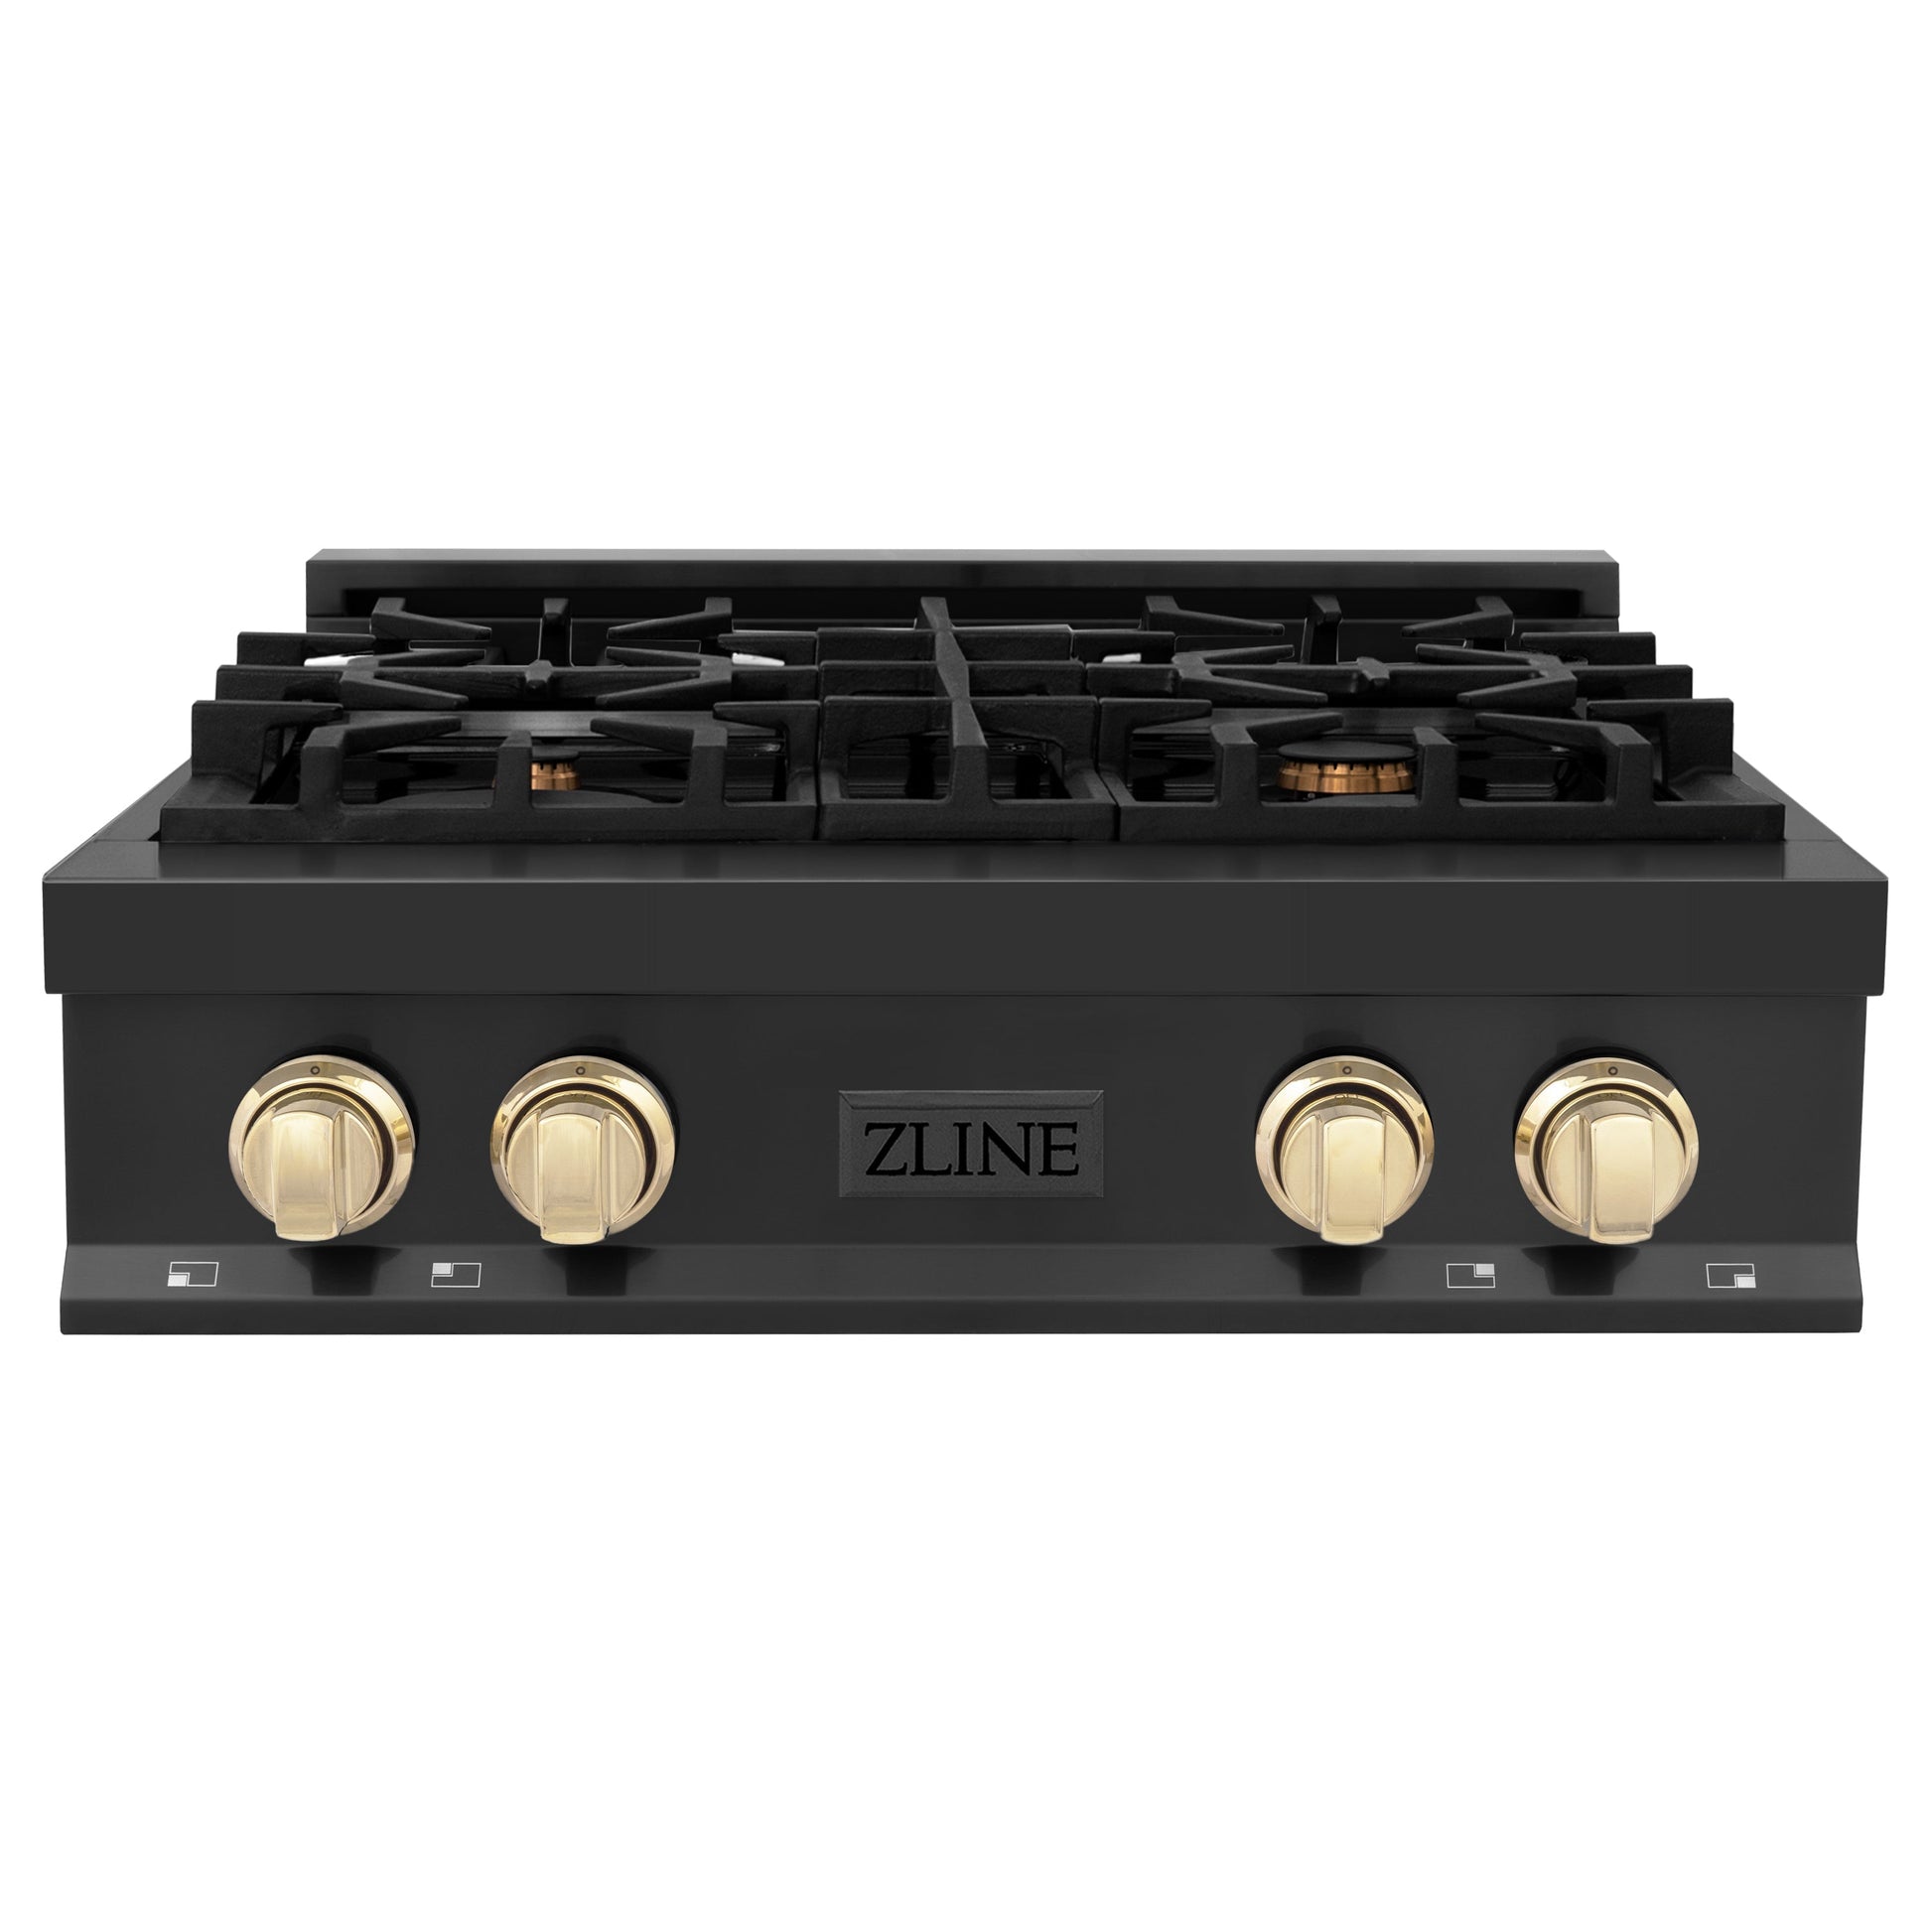 ZLINE Autograph Edition 30" Porcelain 4 Burner Gas Rangetop - Black Stainless Steel with Accents